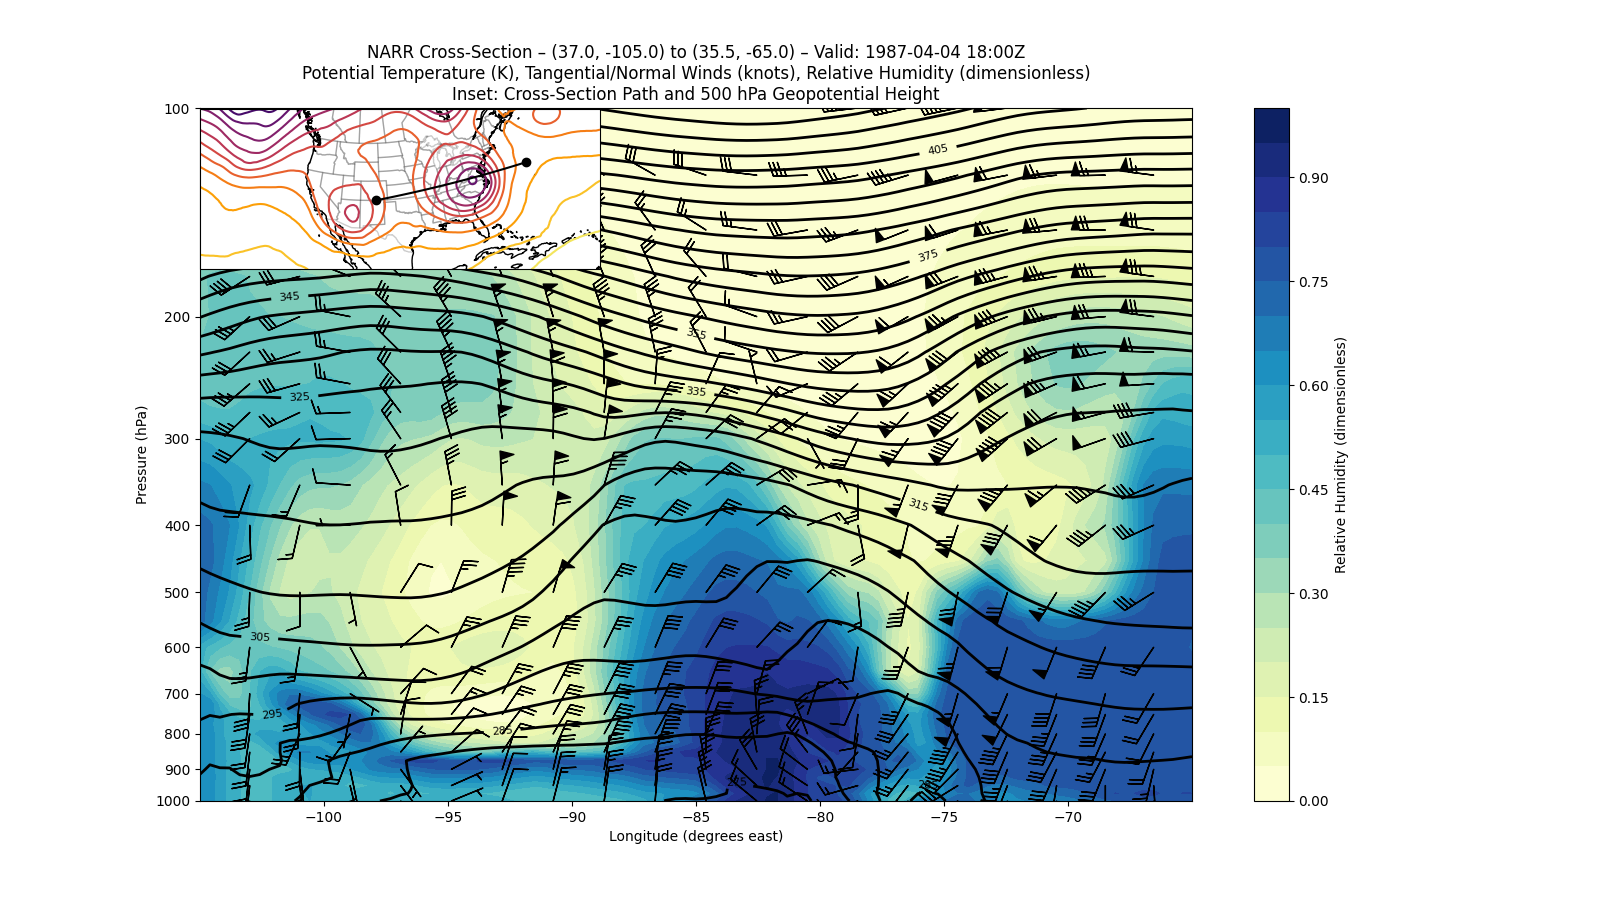 NARR Cross-Section – (37.0, -105.0) to (35.5, -65.0) – Valid: 1987-04-04 18:00Z Potential Temperature (K), Tangential/Normal Winds (knots), Relative Humidity (dimensionless) Inset: Cross-Section Path and 500 hPa Geopotential Height